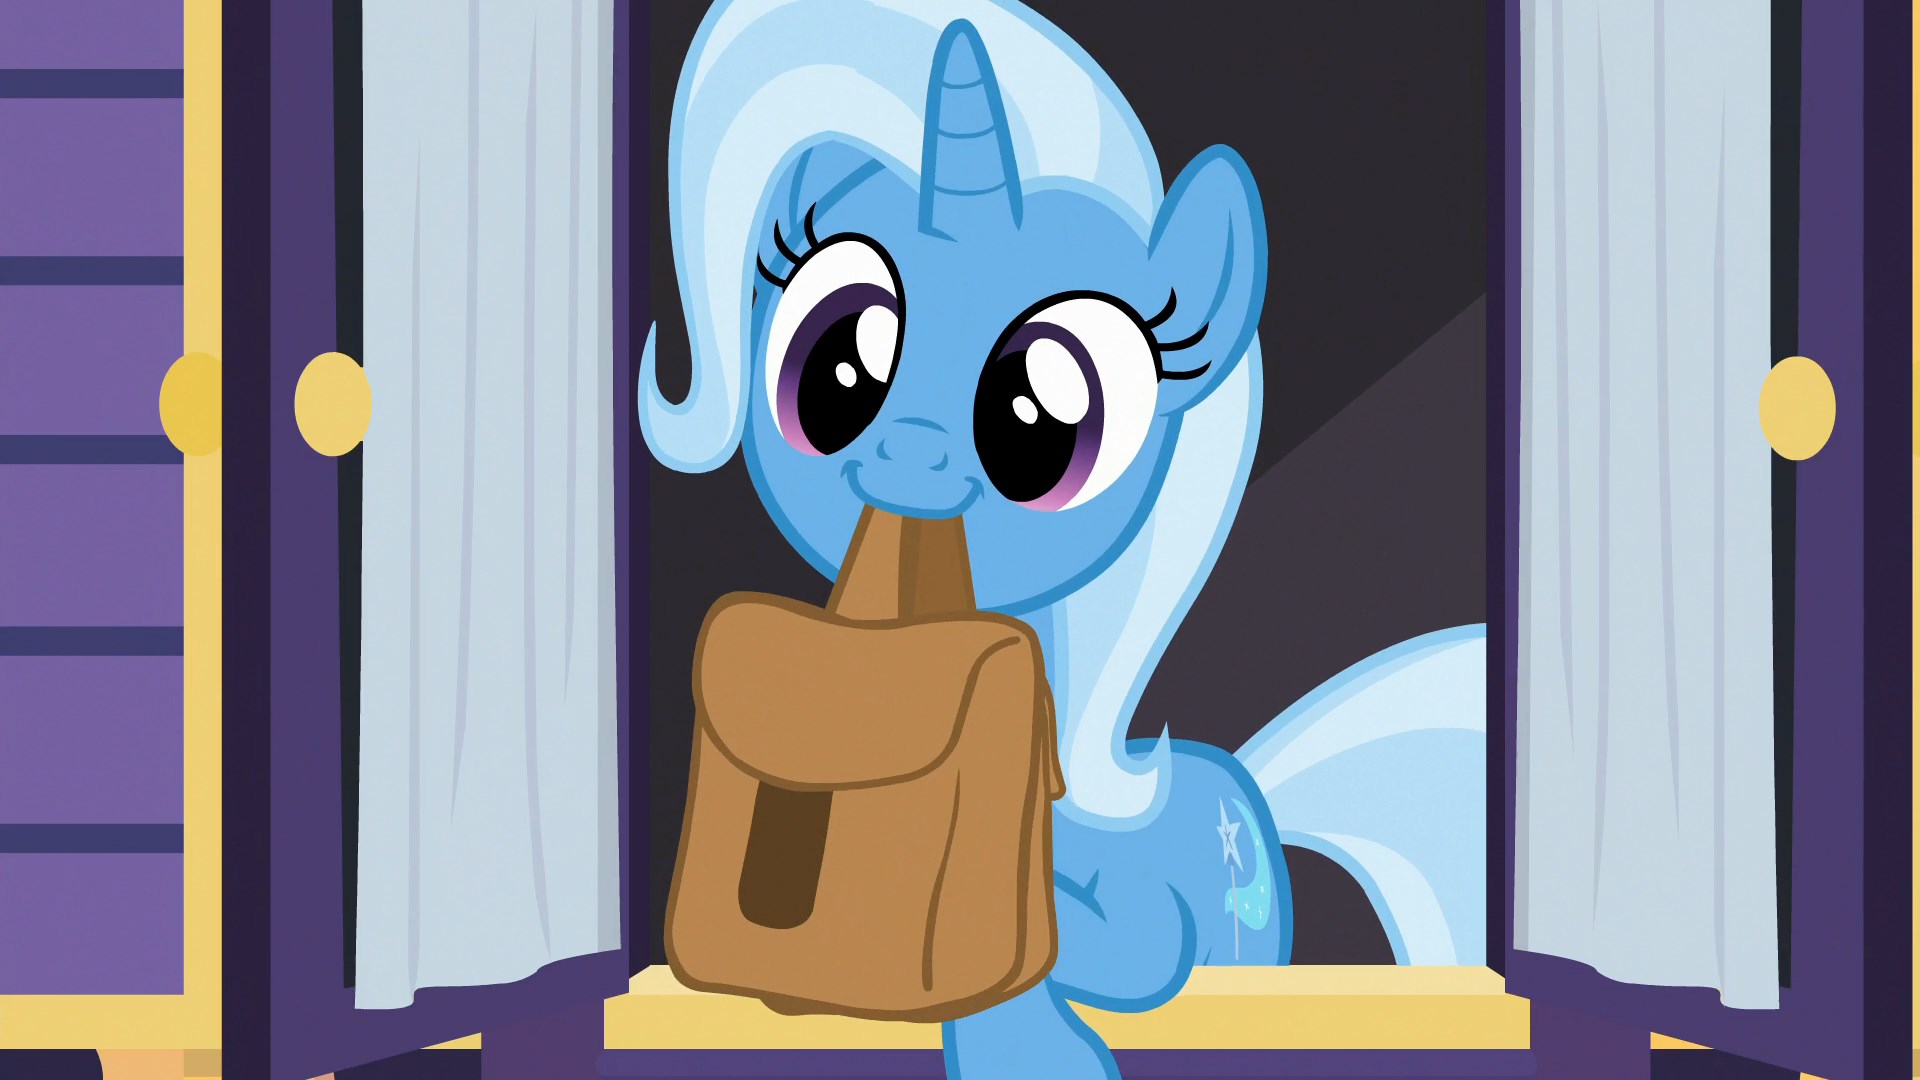 px My Little Pony Trixie (pony) High Quality Wallpaper, High Definition Wallpaper